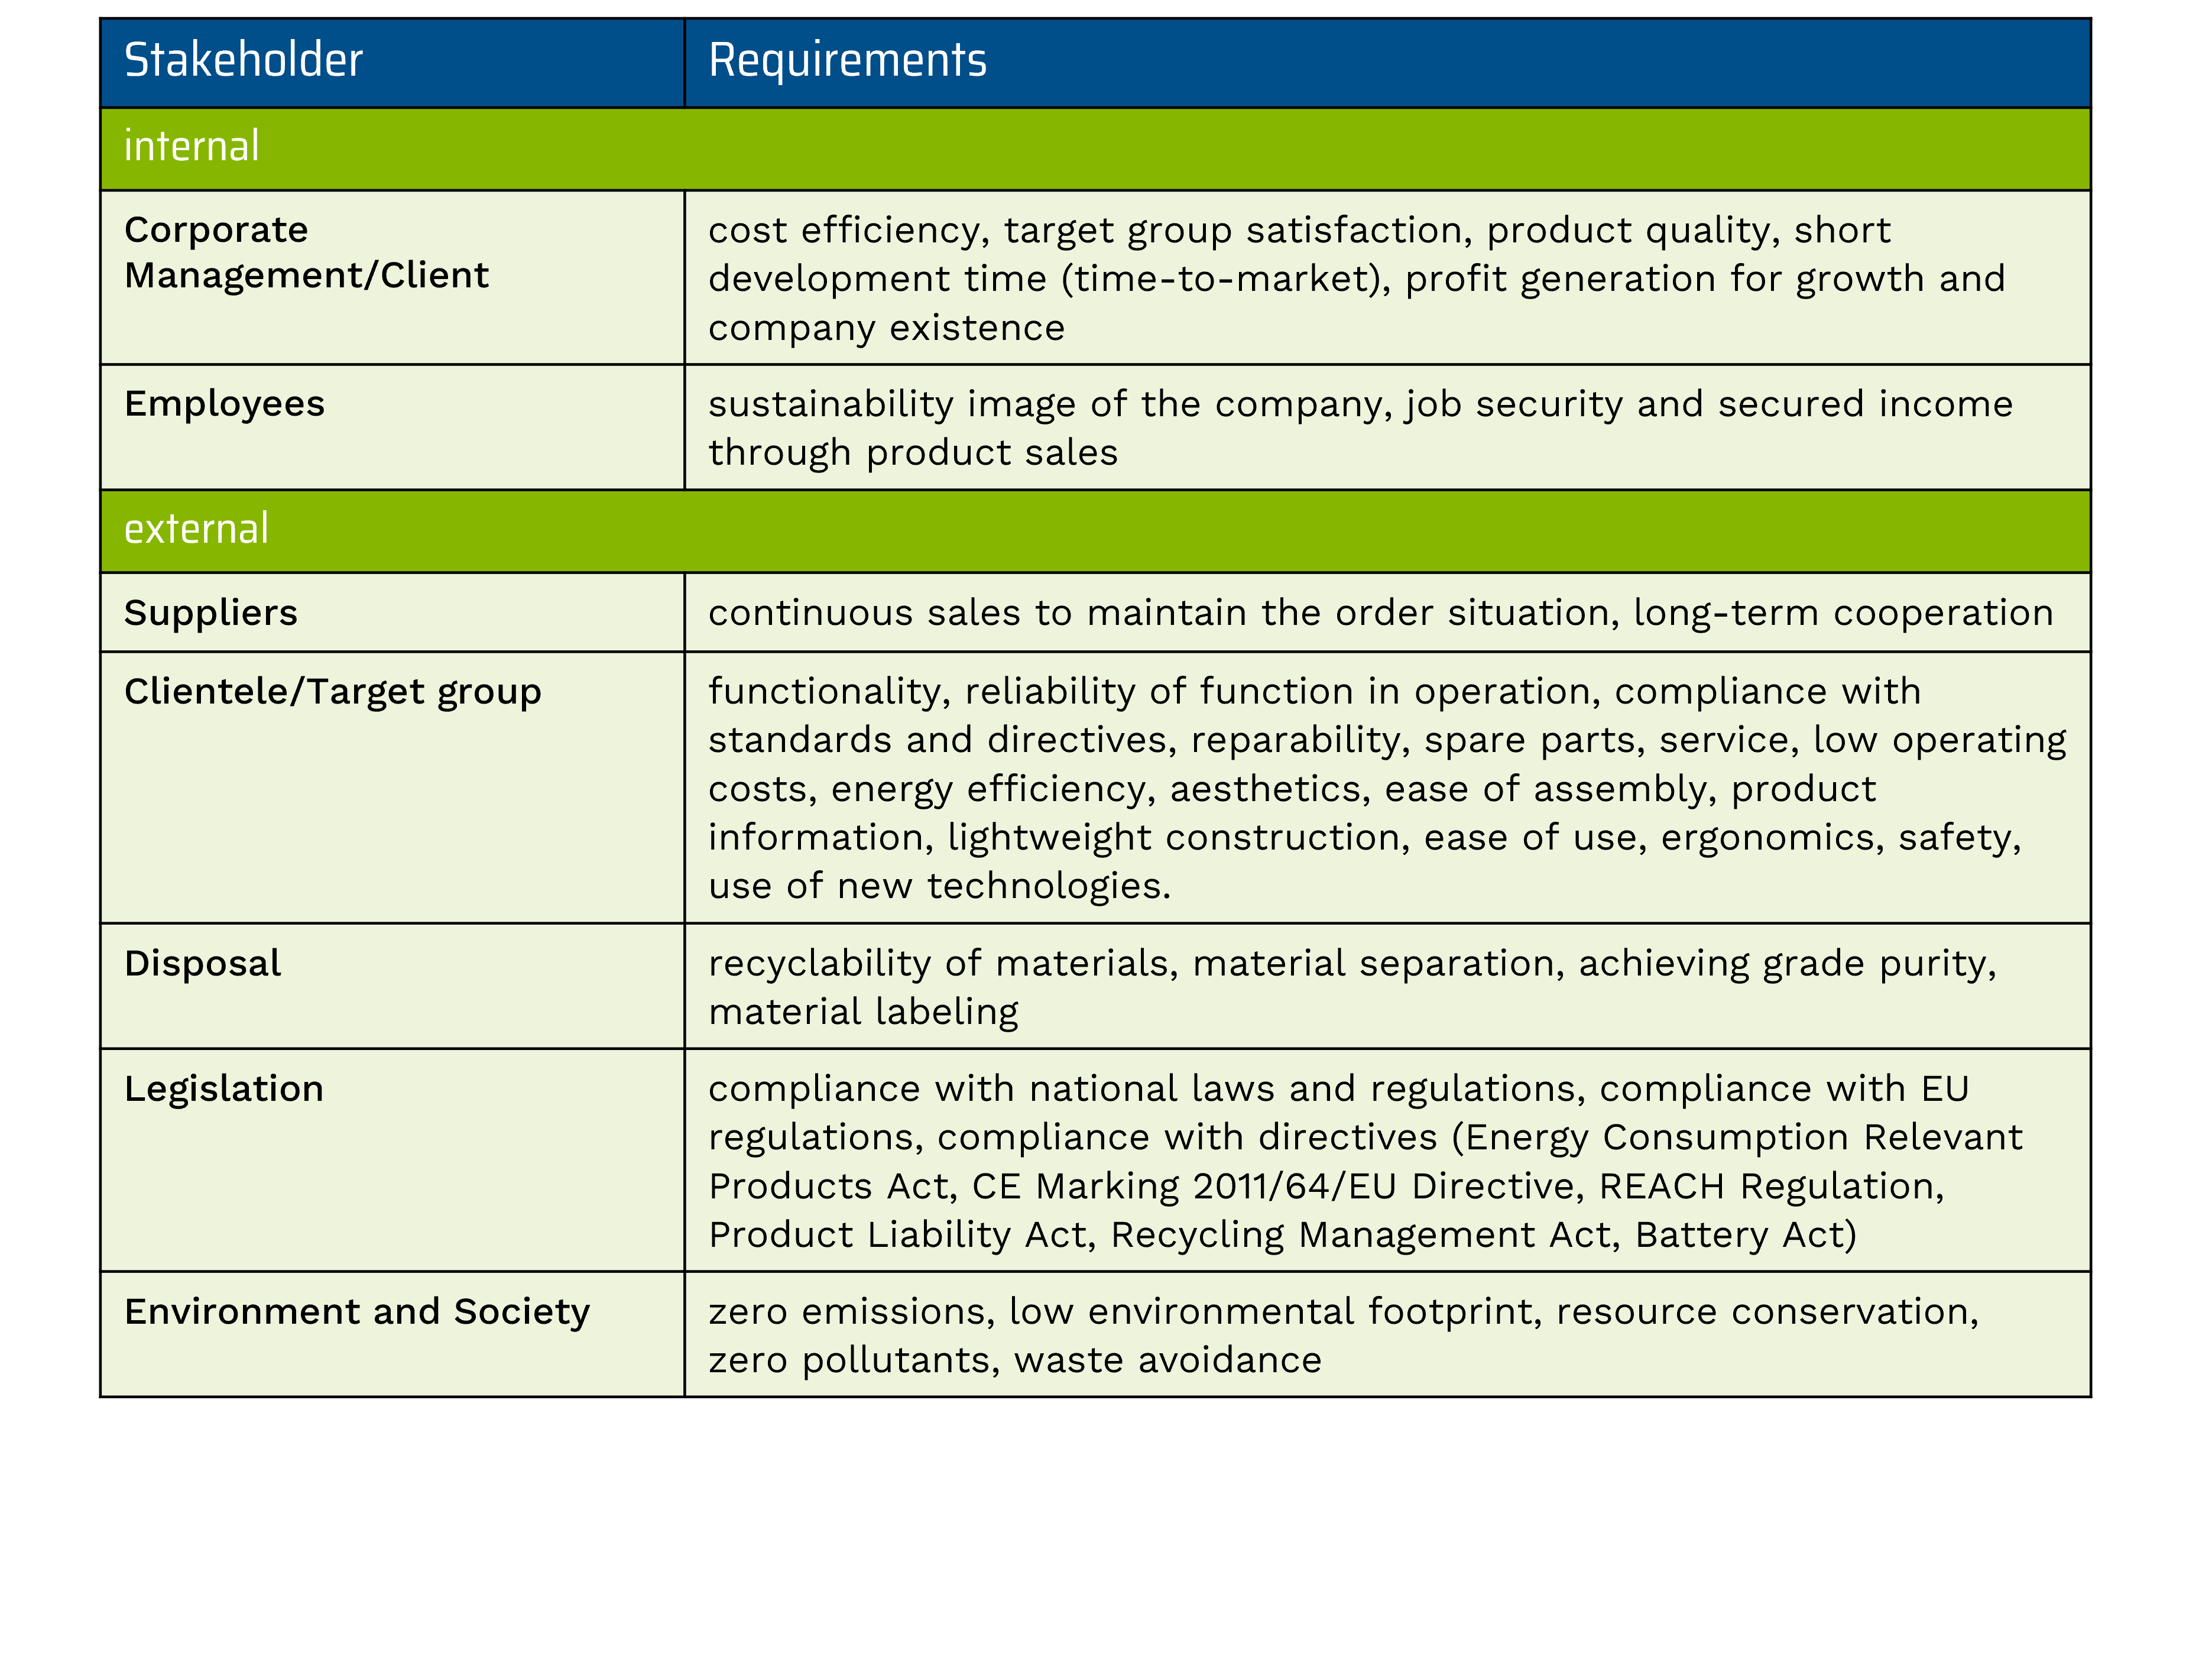 The table shows - sorted by "internal" and "external" - the interests and requirements of different stakeholders for integrated product development.